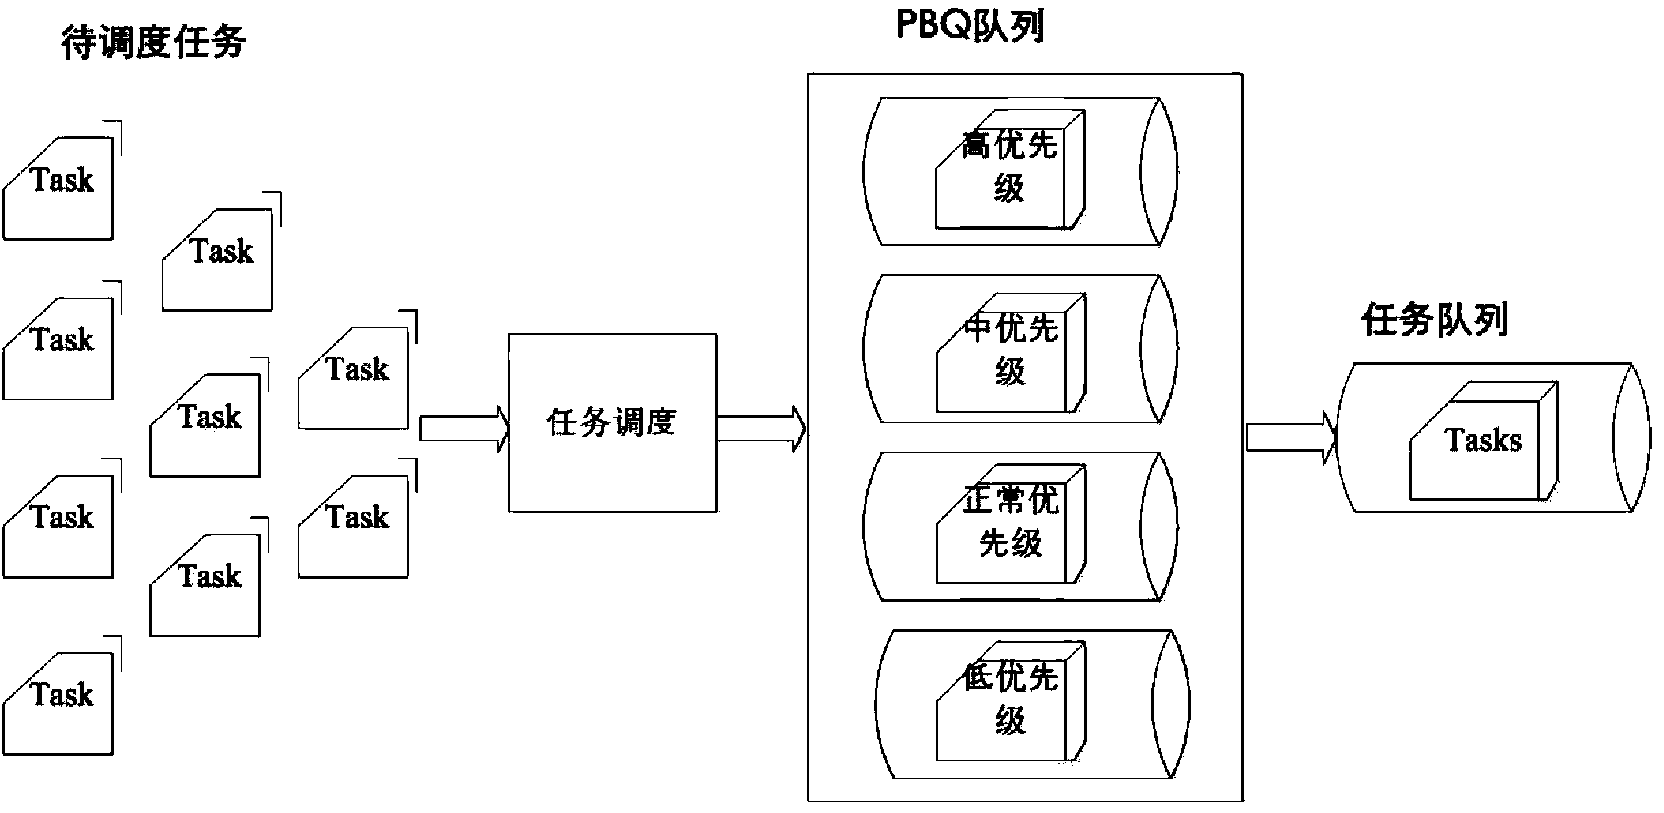 Cross-device and cross-protocol EPON element management system